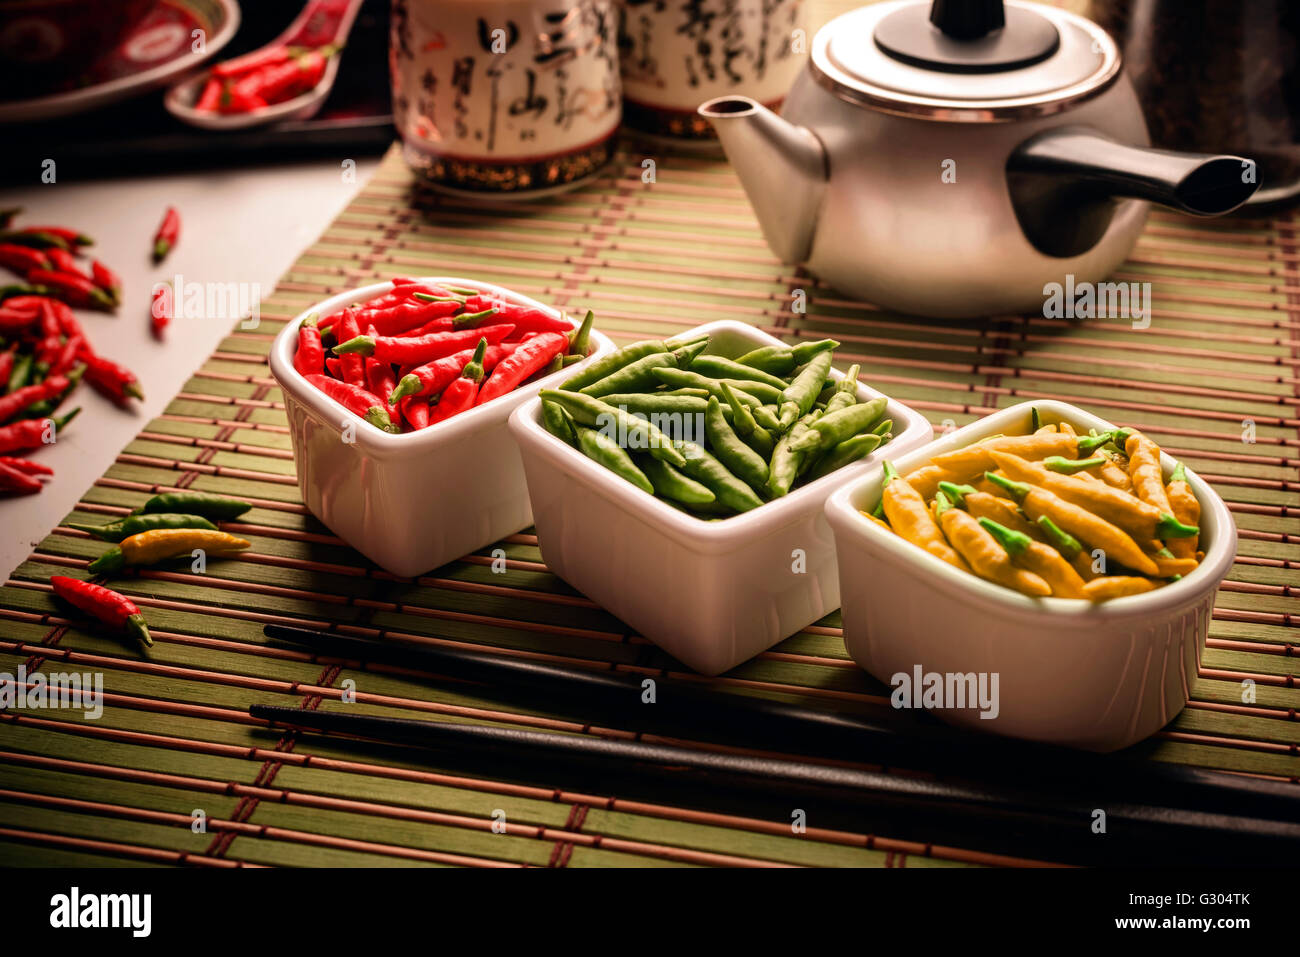 Red, green and yellow chilli peppers. Stock Photo